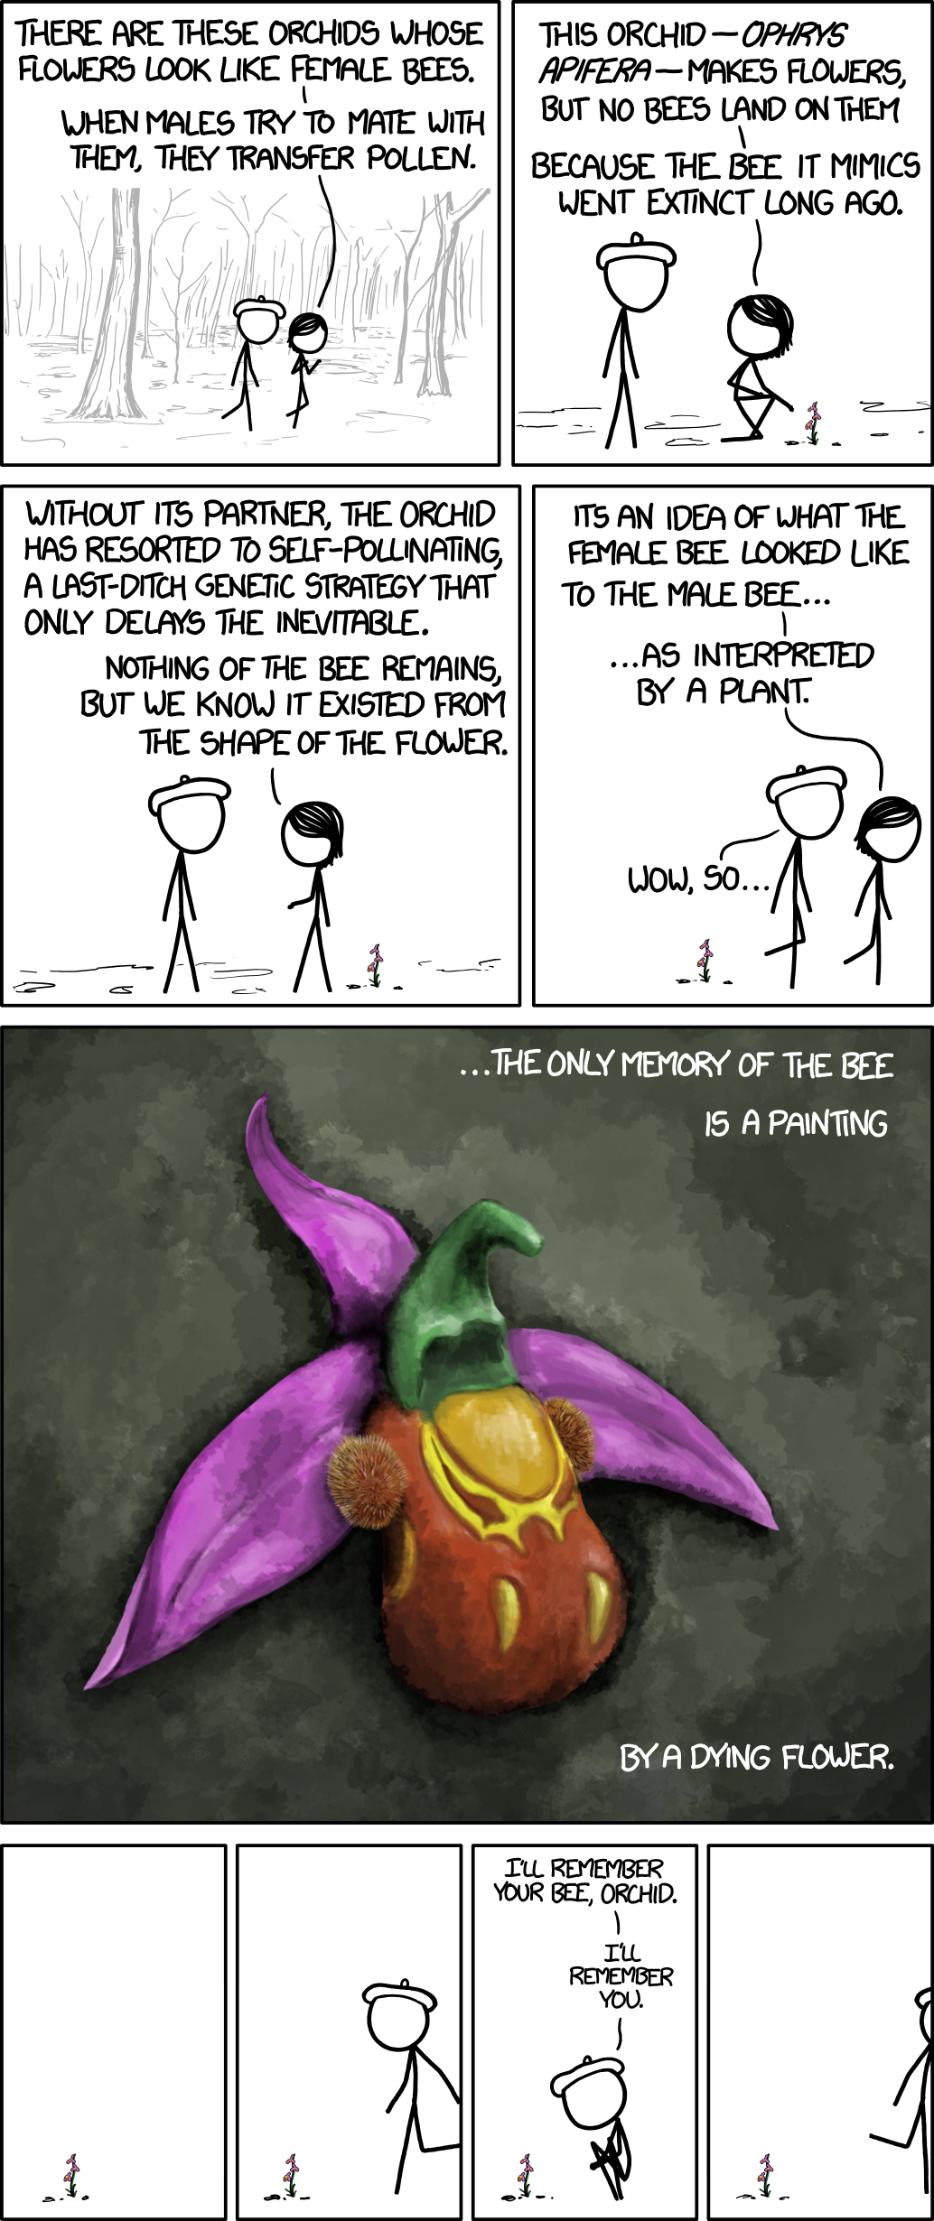 xkcd comic explaining that there are orchids whose flowers look like female bees, but the bee who the flower was mimicking went extinct.

"The only memory of the bee is a painting by a dying flower"